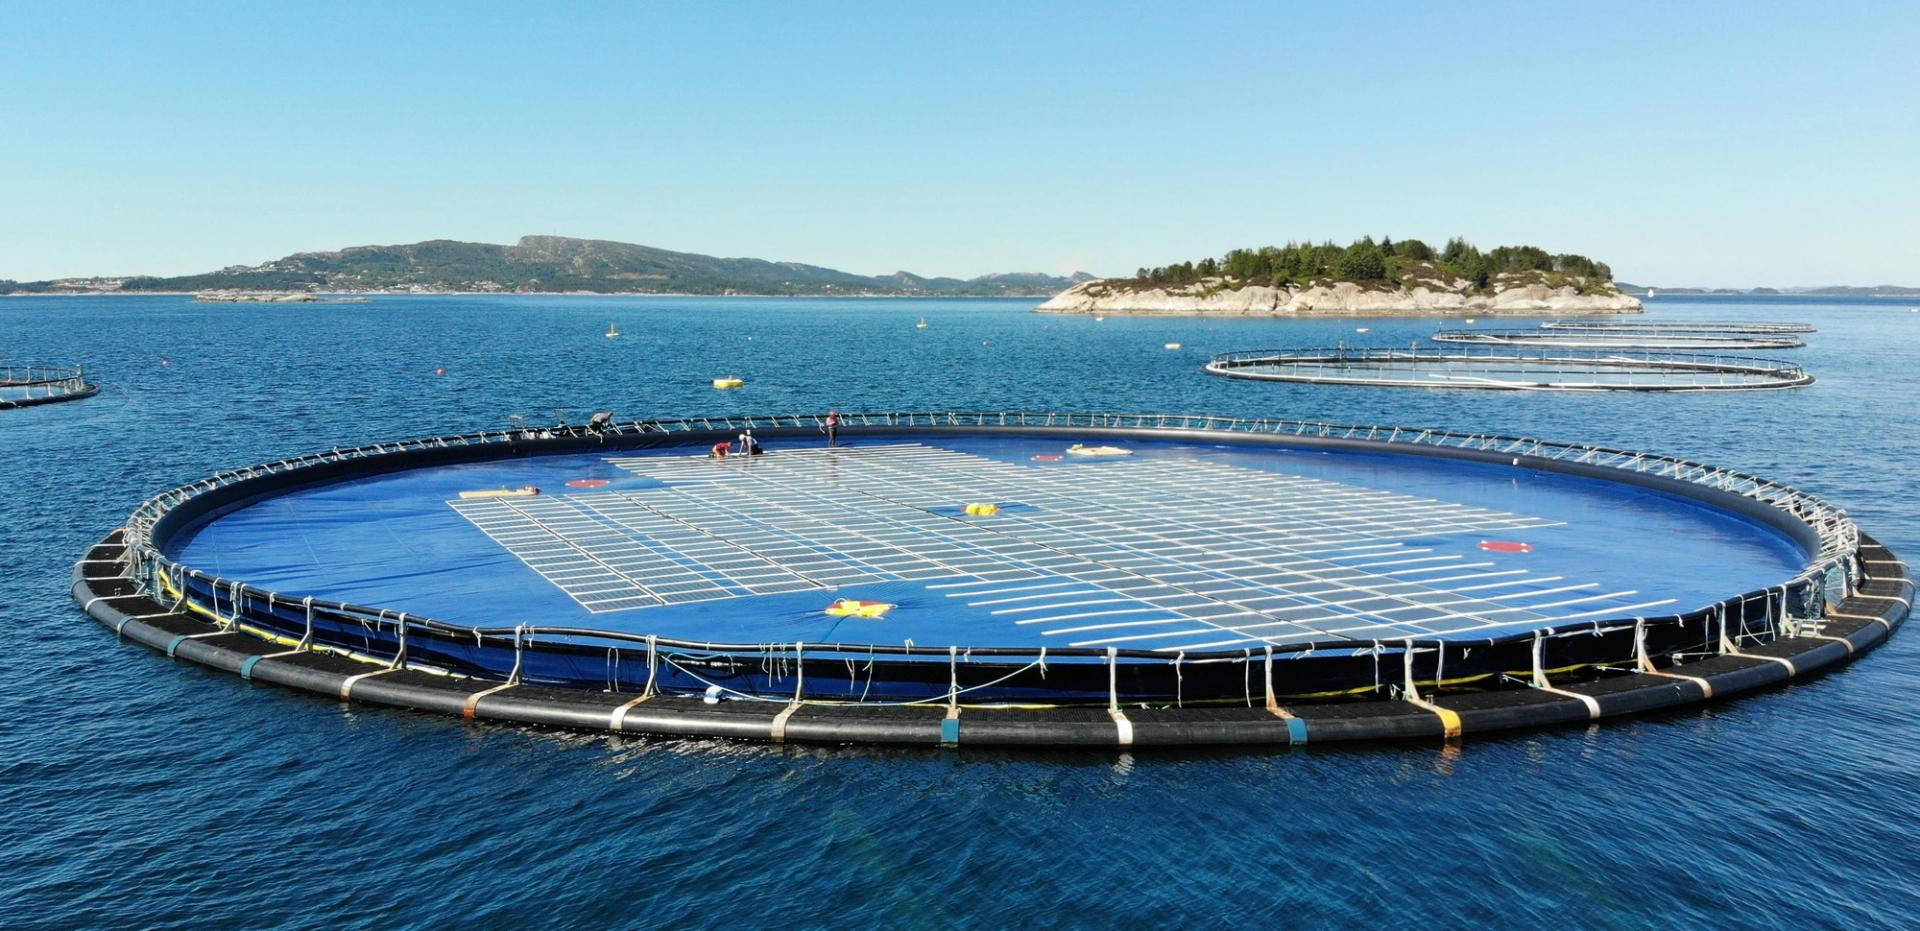 Four Ocean Sun floating solar stations in a coastal setting with clear skies